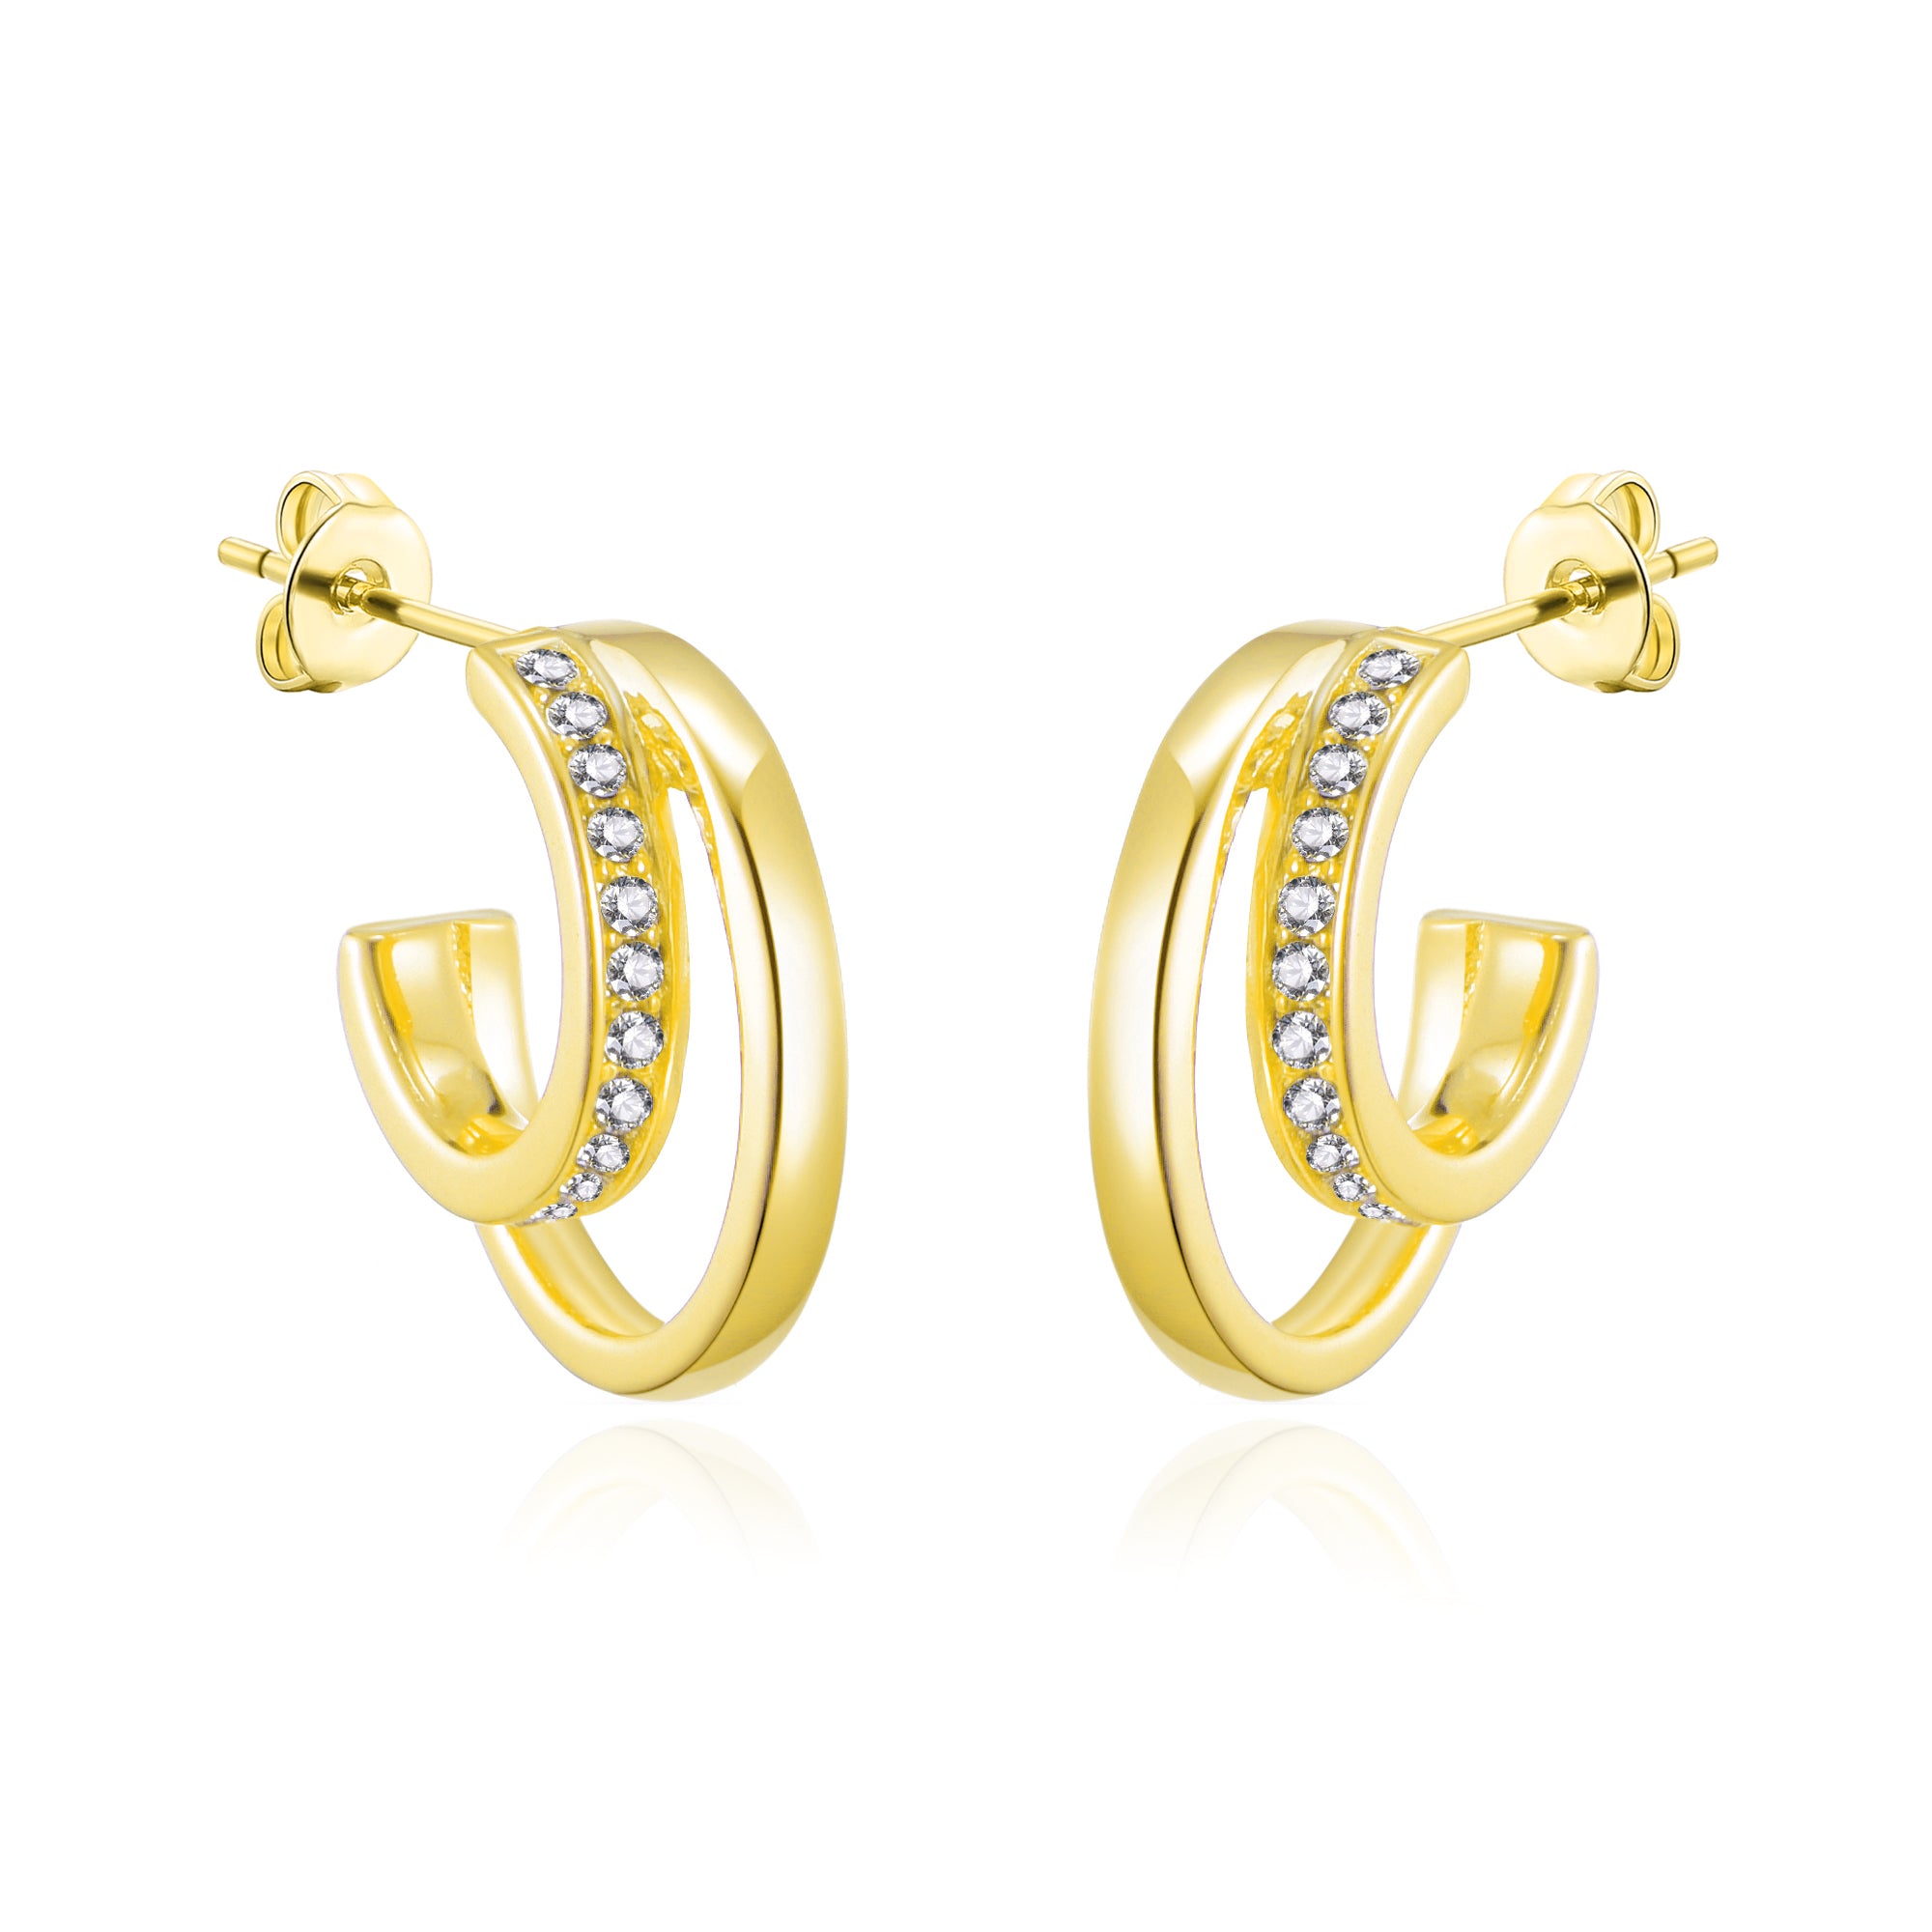 Gold Plated Open Double Hoop Earrings Created With Zircondia® Crystals